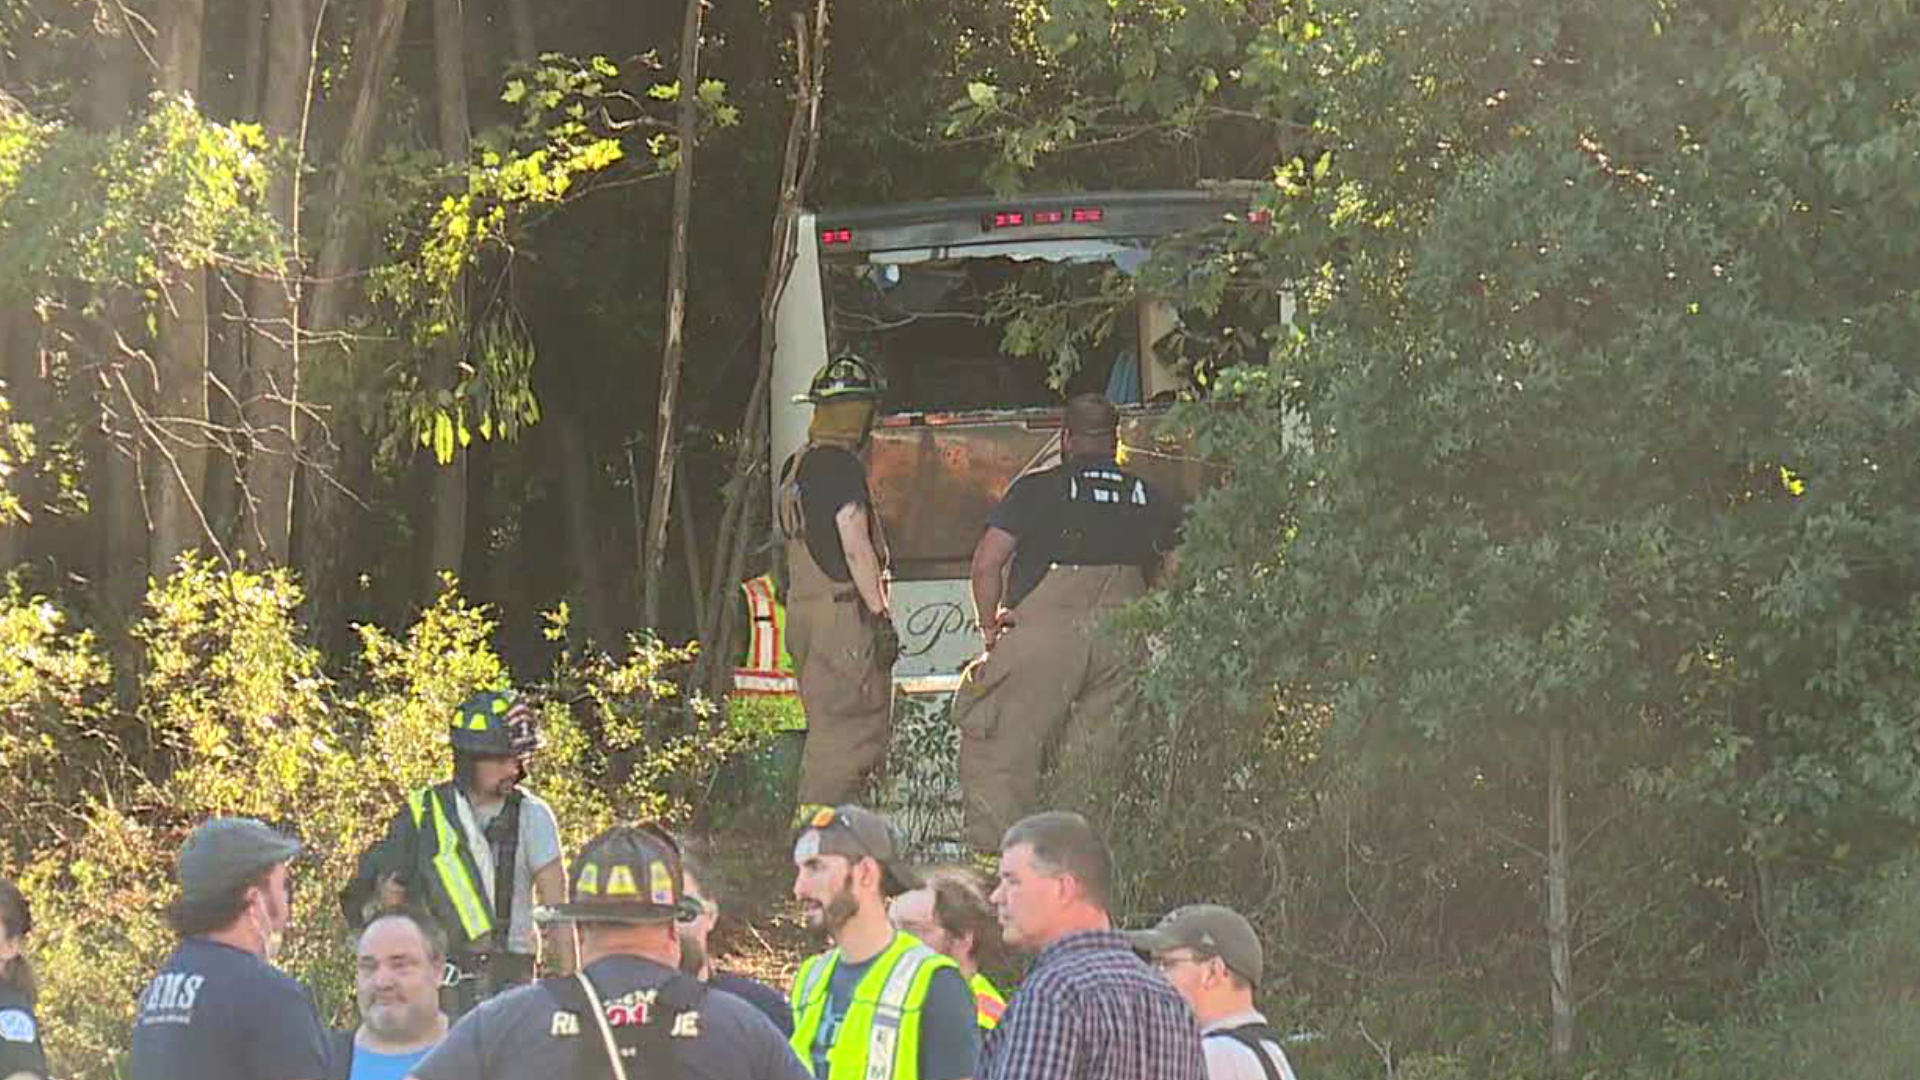 Troopers are investigating the cause of Sunday afternoon's bus crash in Schuylkill County that sent more than 30 people to hospitals.